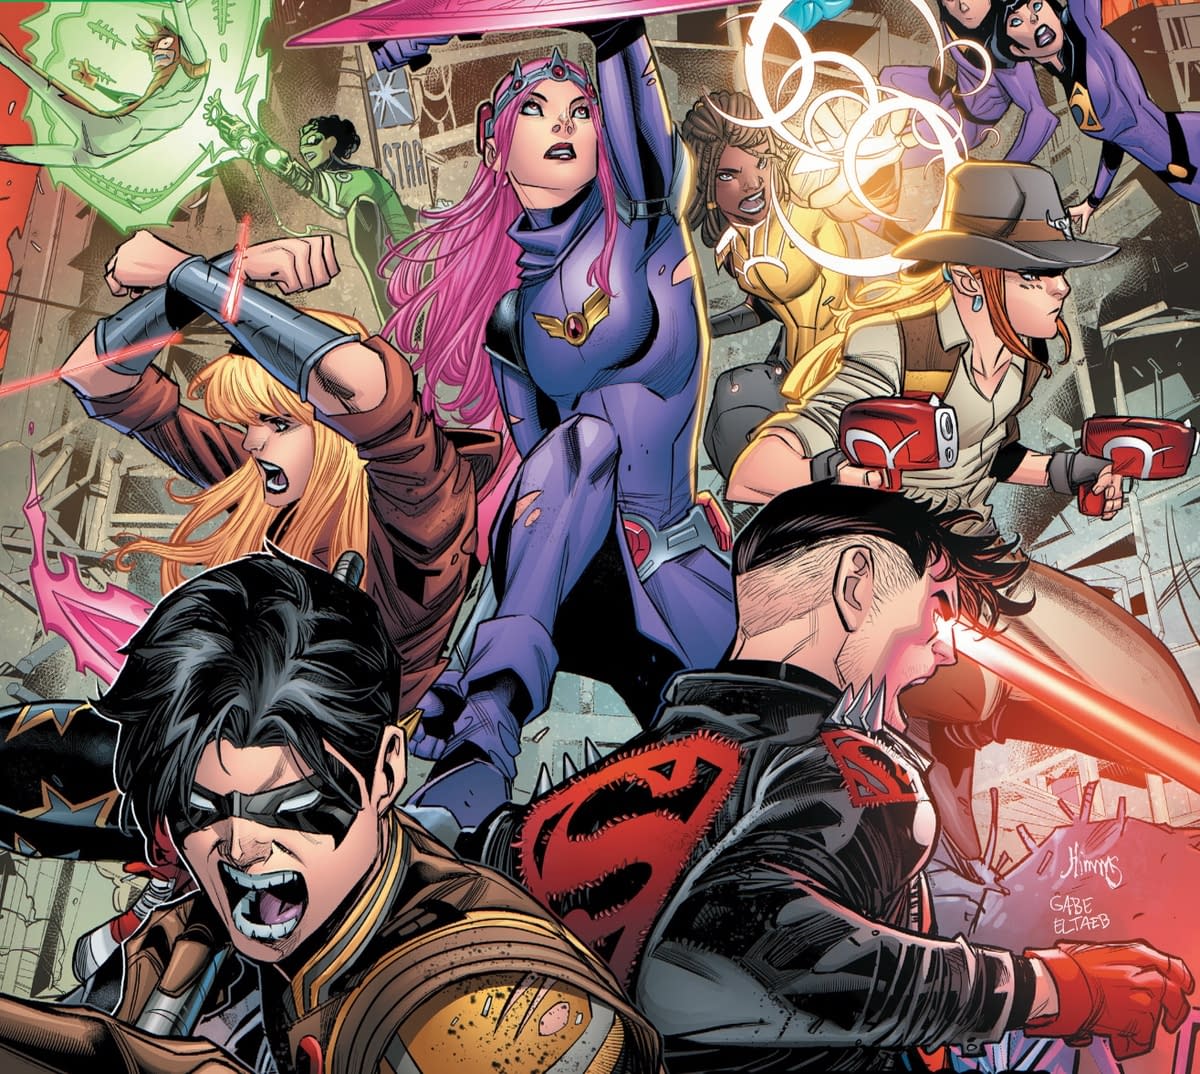 REVIEW: Young Justice #12 -- "Like That One Kid In High School Who Just Discovered Adderall"